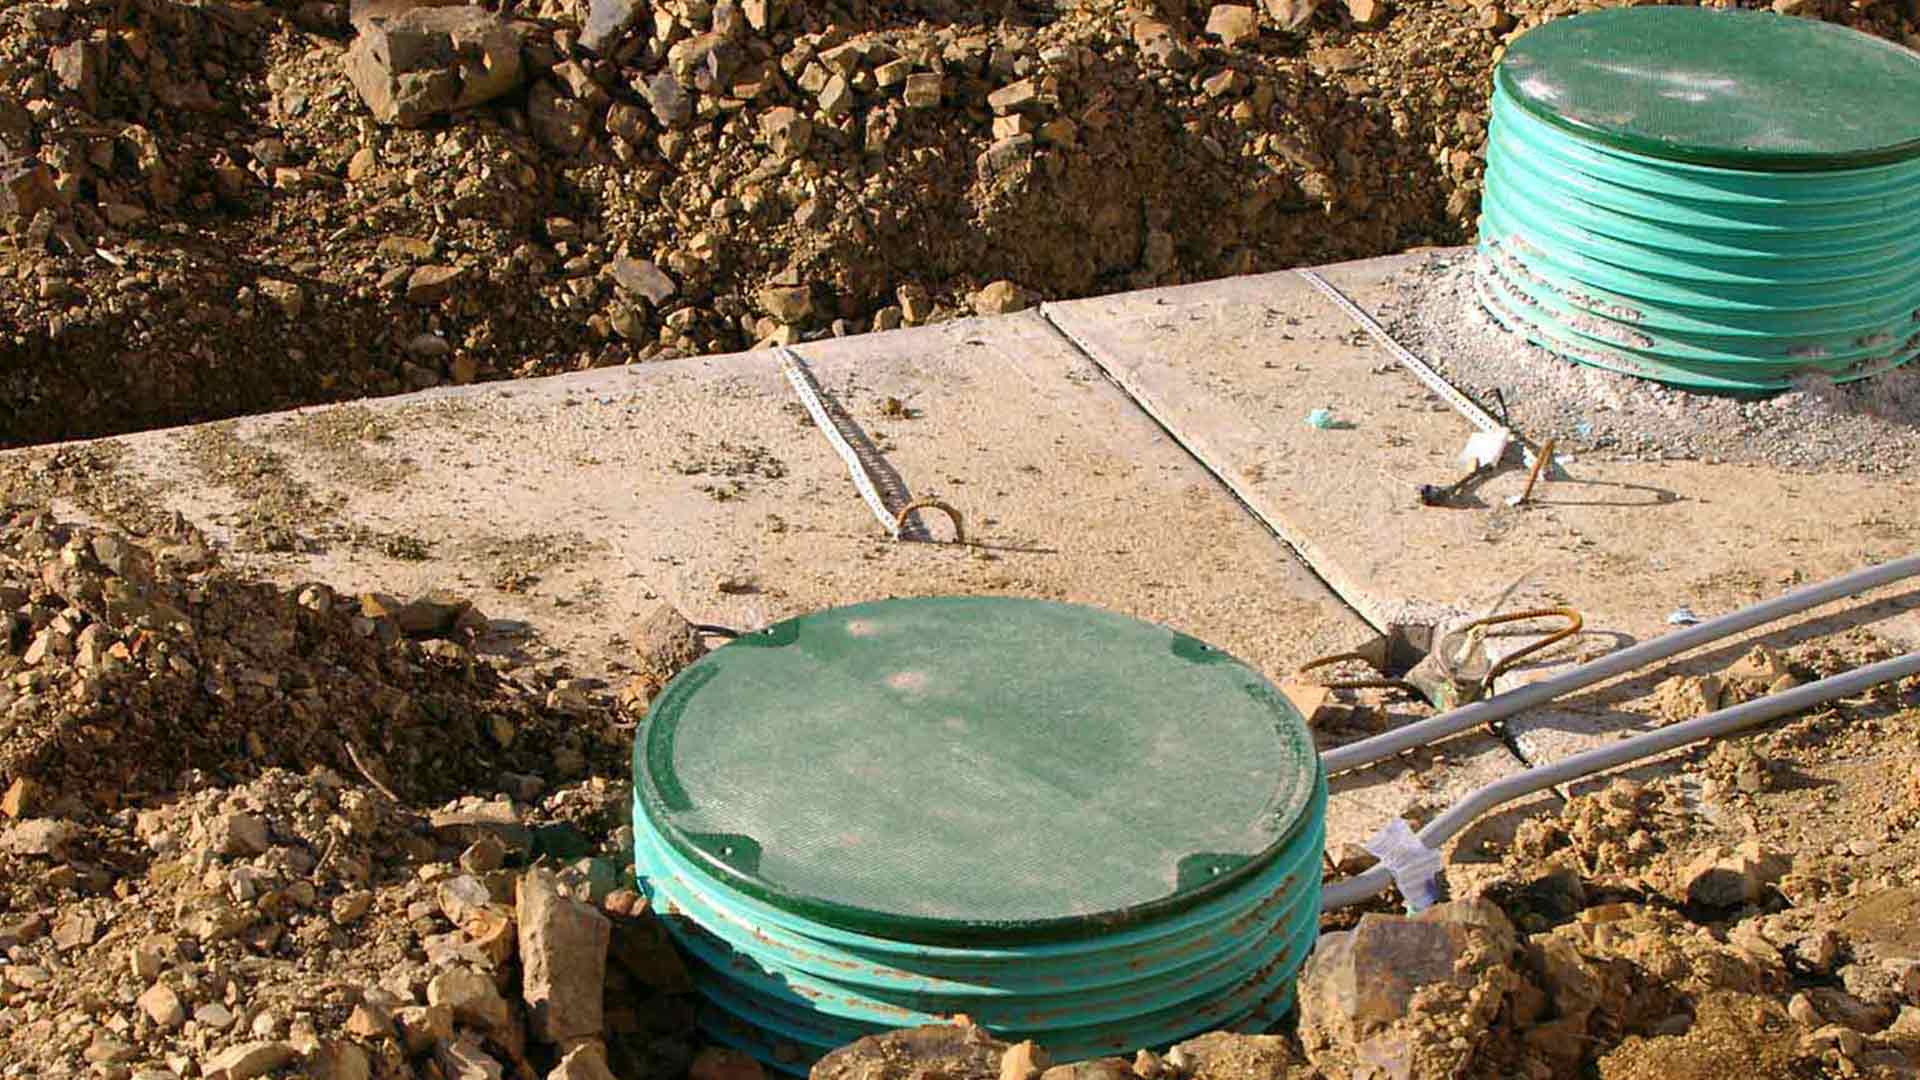 WHAT IS THE BEST MAINTENANCE FOR A SEPTIC SYSTEM?